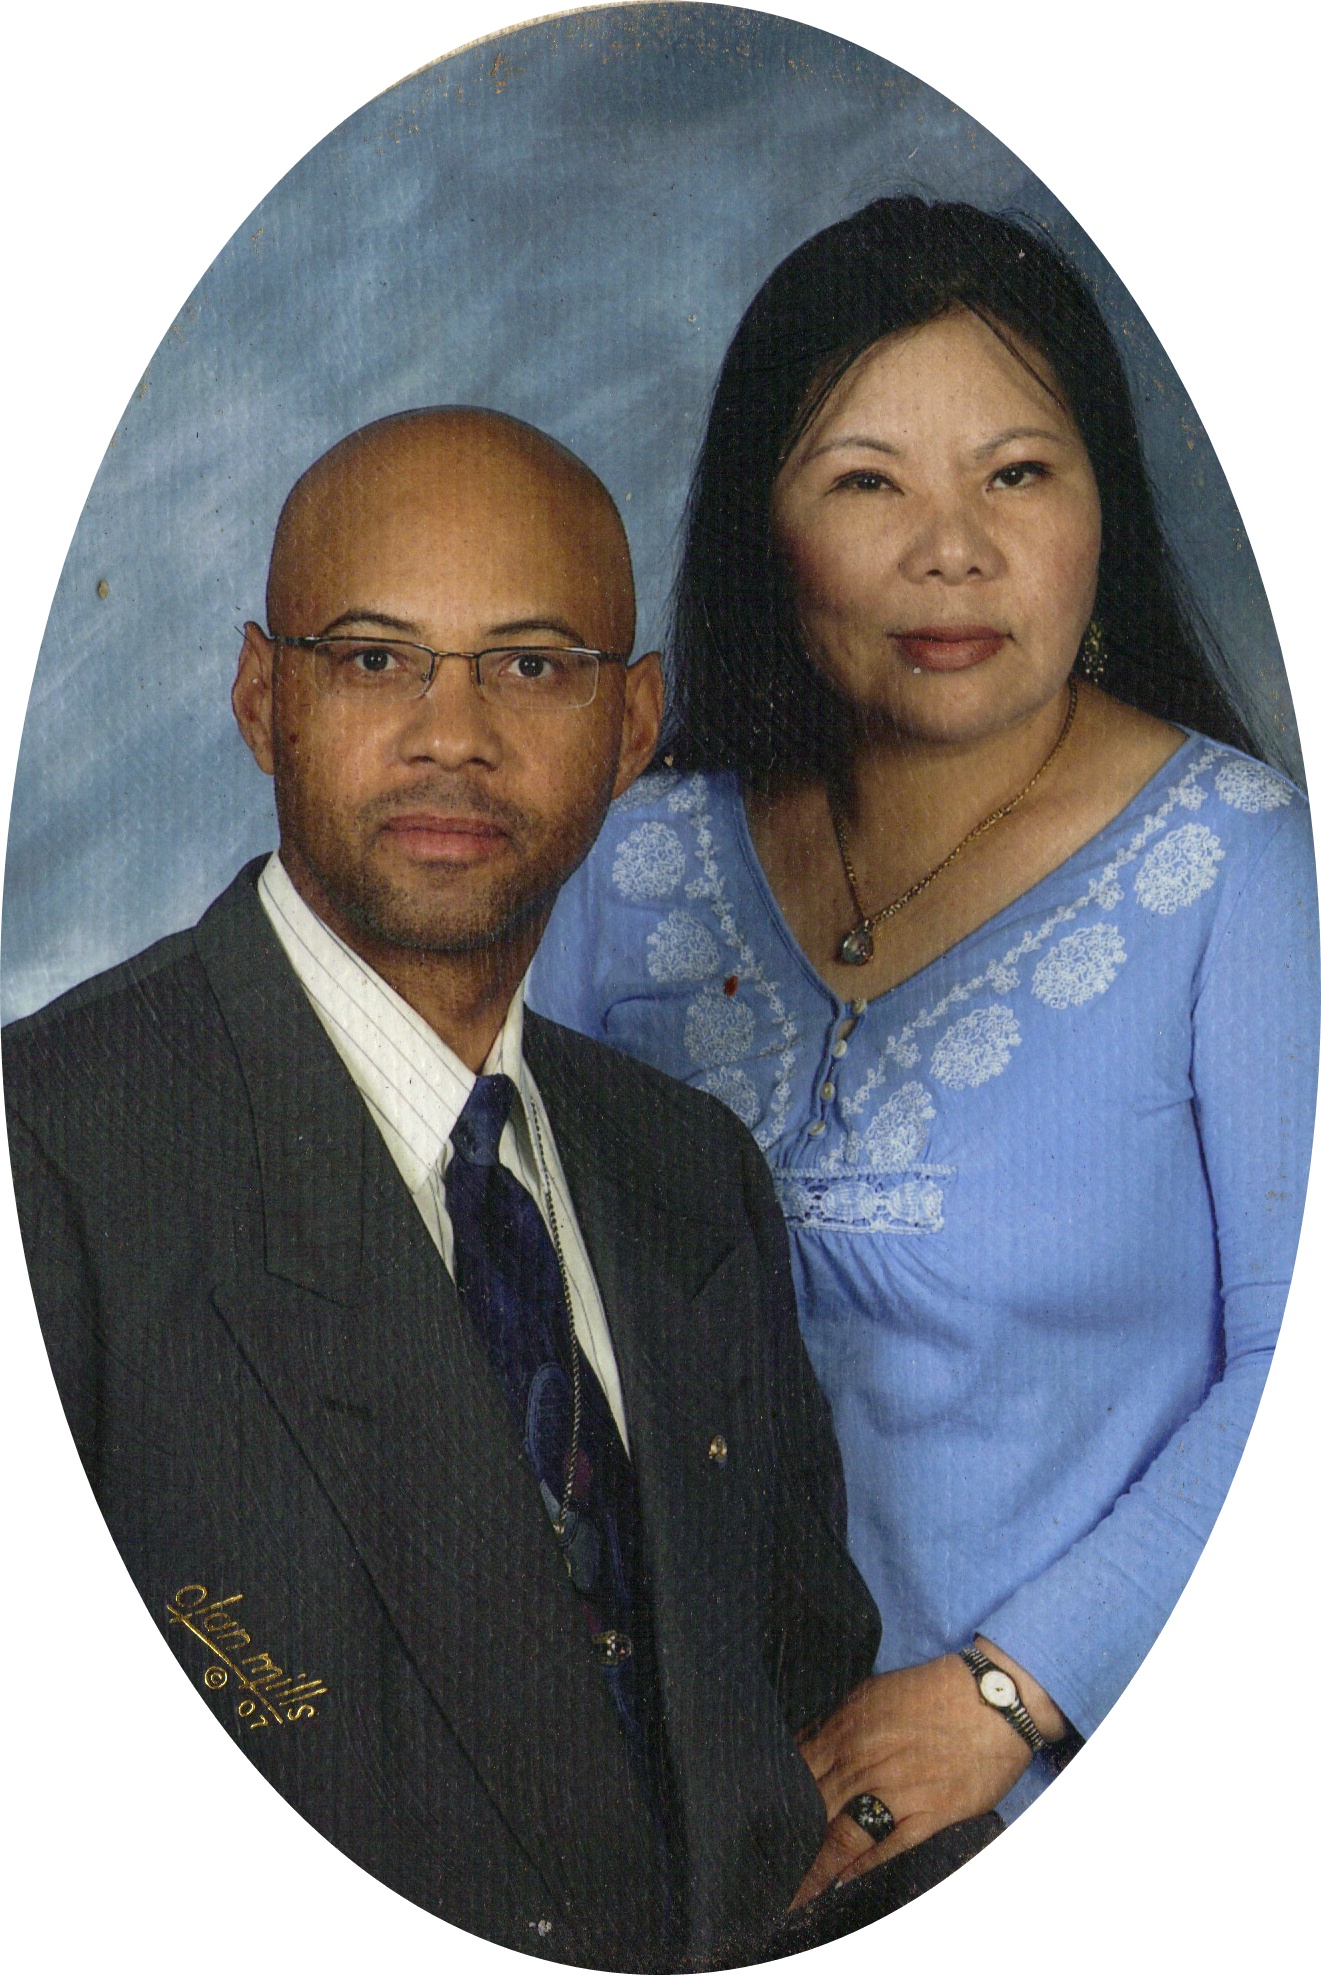 Pastor and First Lady Lee